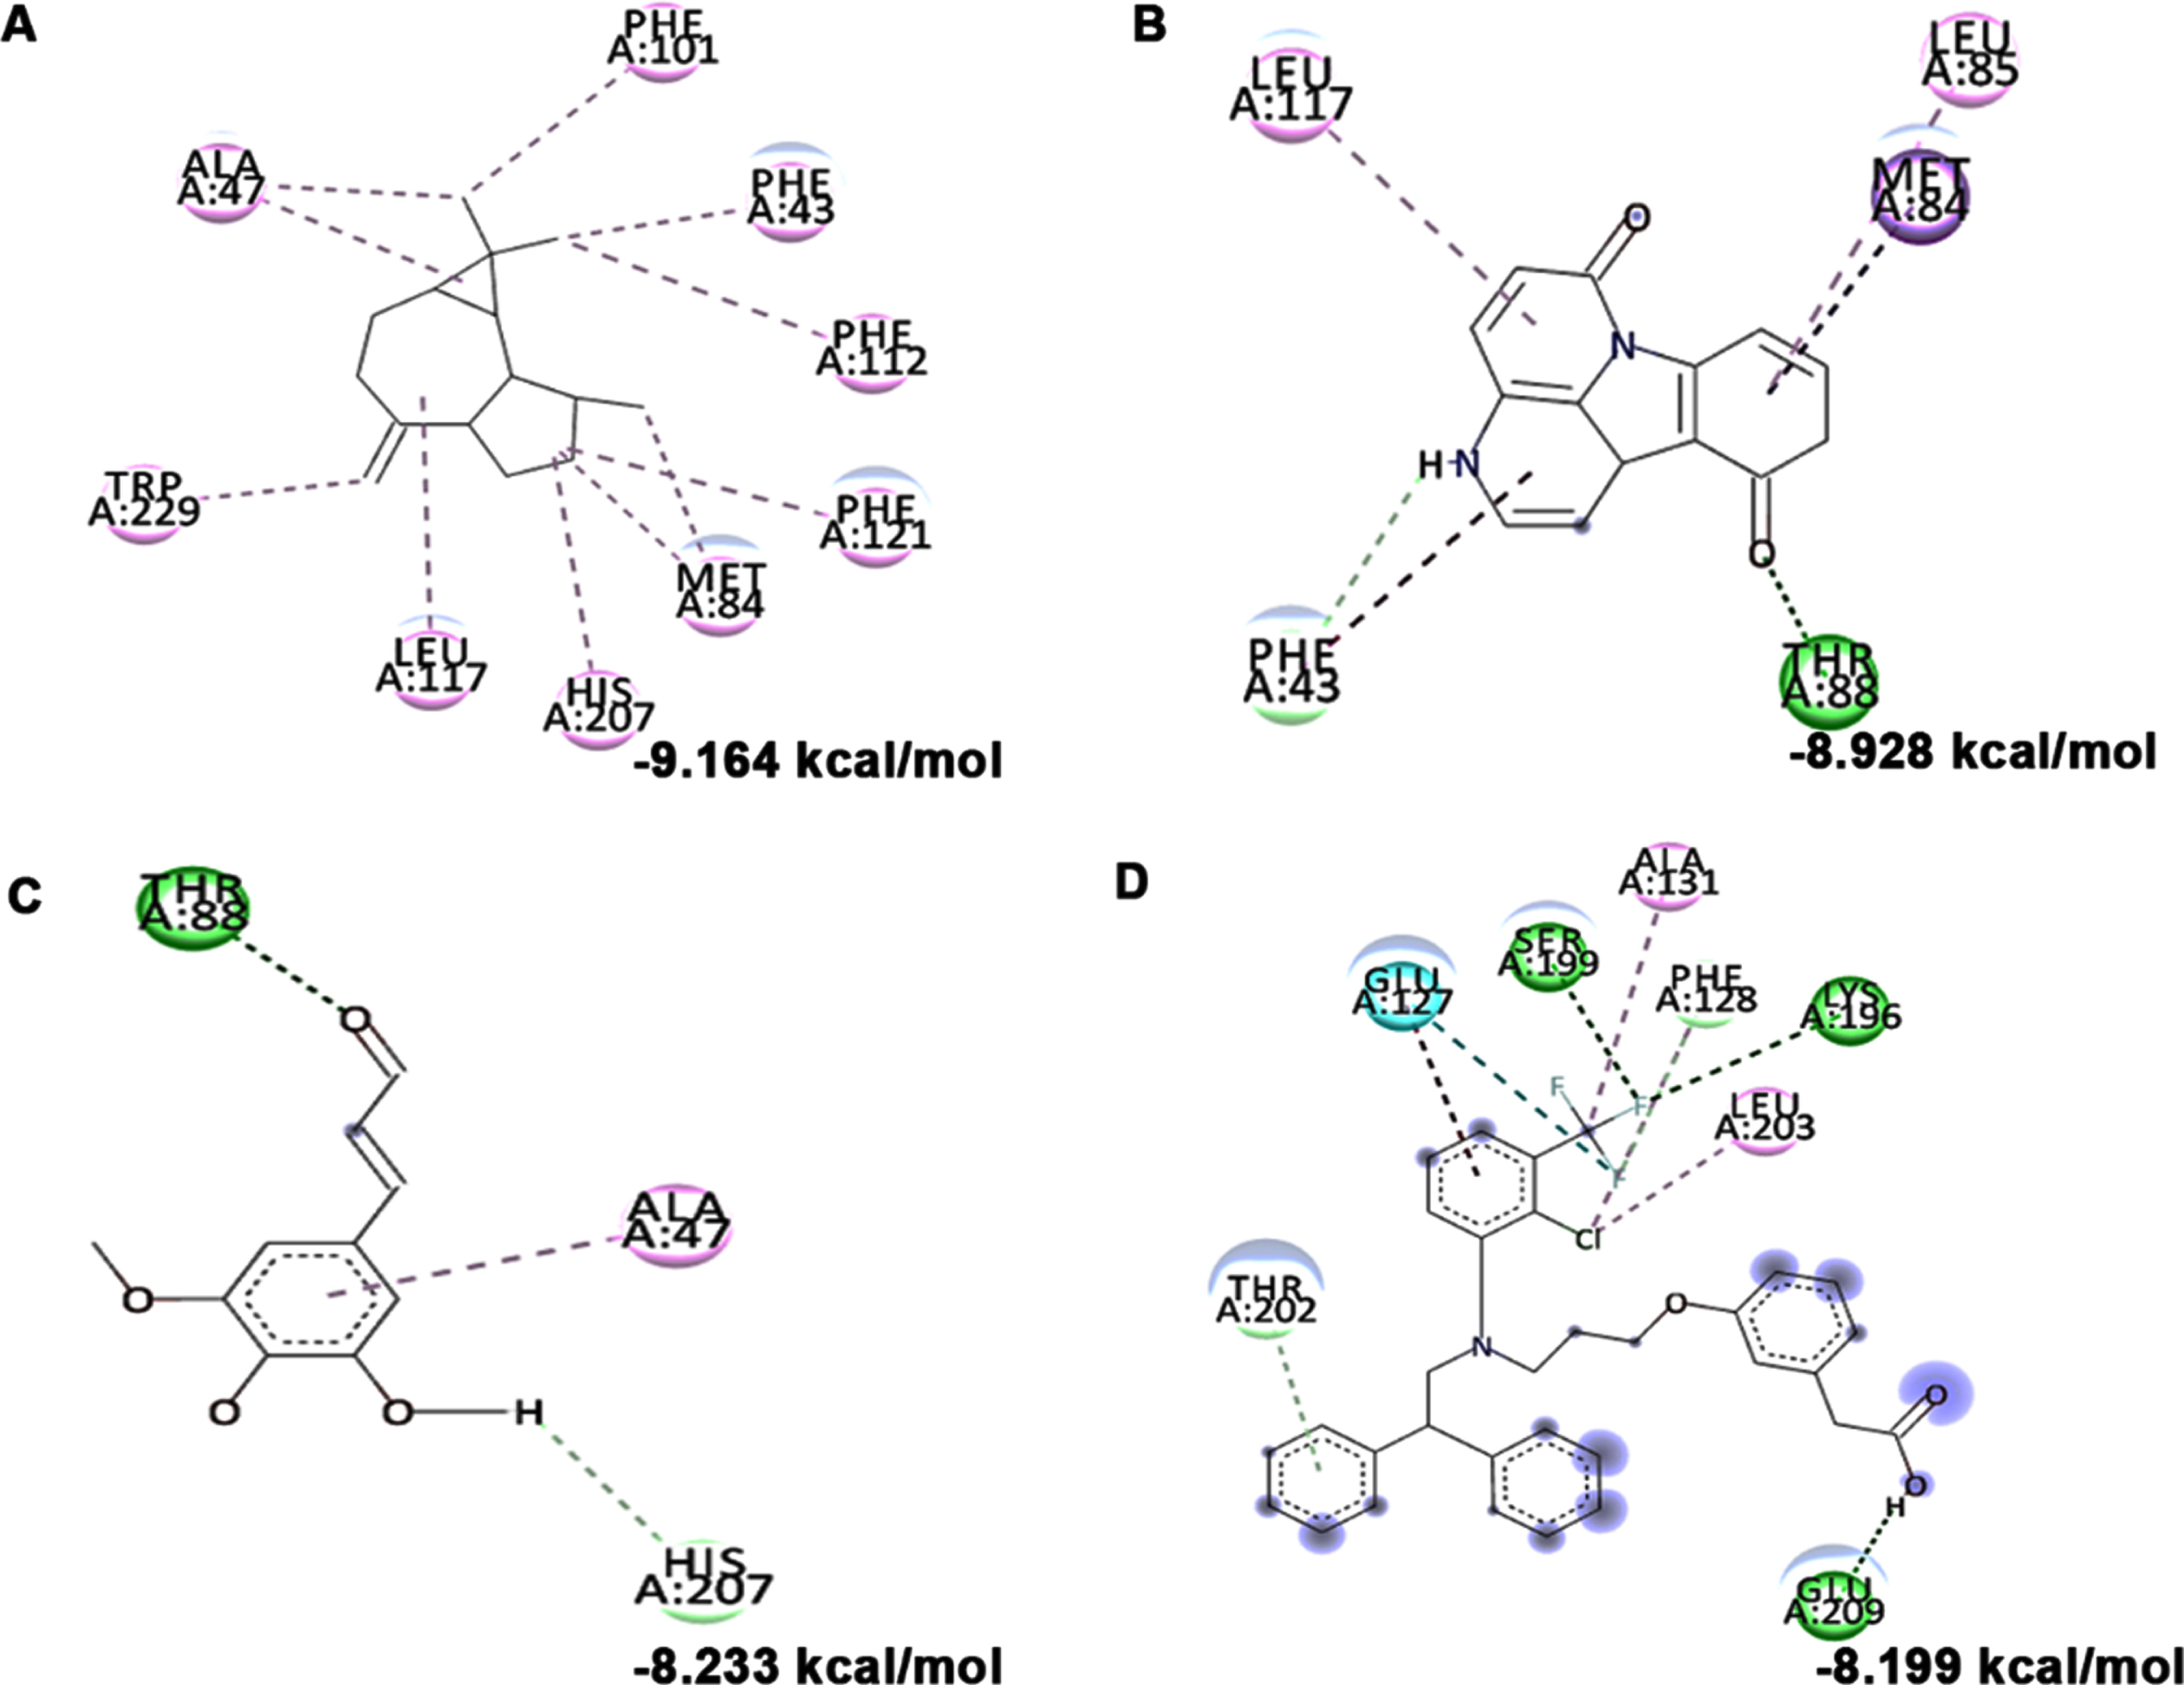 Molecular docking and mode of interaction of compounds (top 3 hits) from HS extract against LXR-β (A) allo-Aromadendrene (B) 11-Hydroxycanthin-6-one (C) Sinapoyl aldehyde (D) GW3965 (Green indicates hydrogen bond, purple represents alkyl bond, pink represents π-alkyl bond)